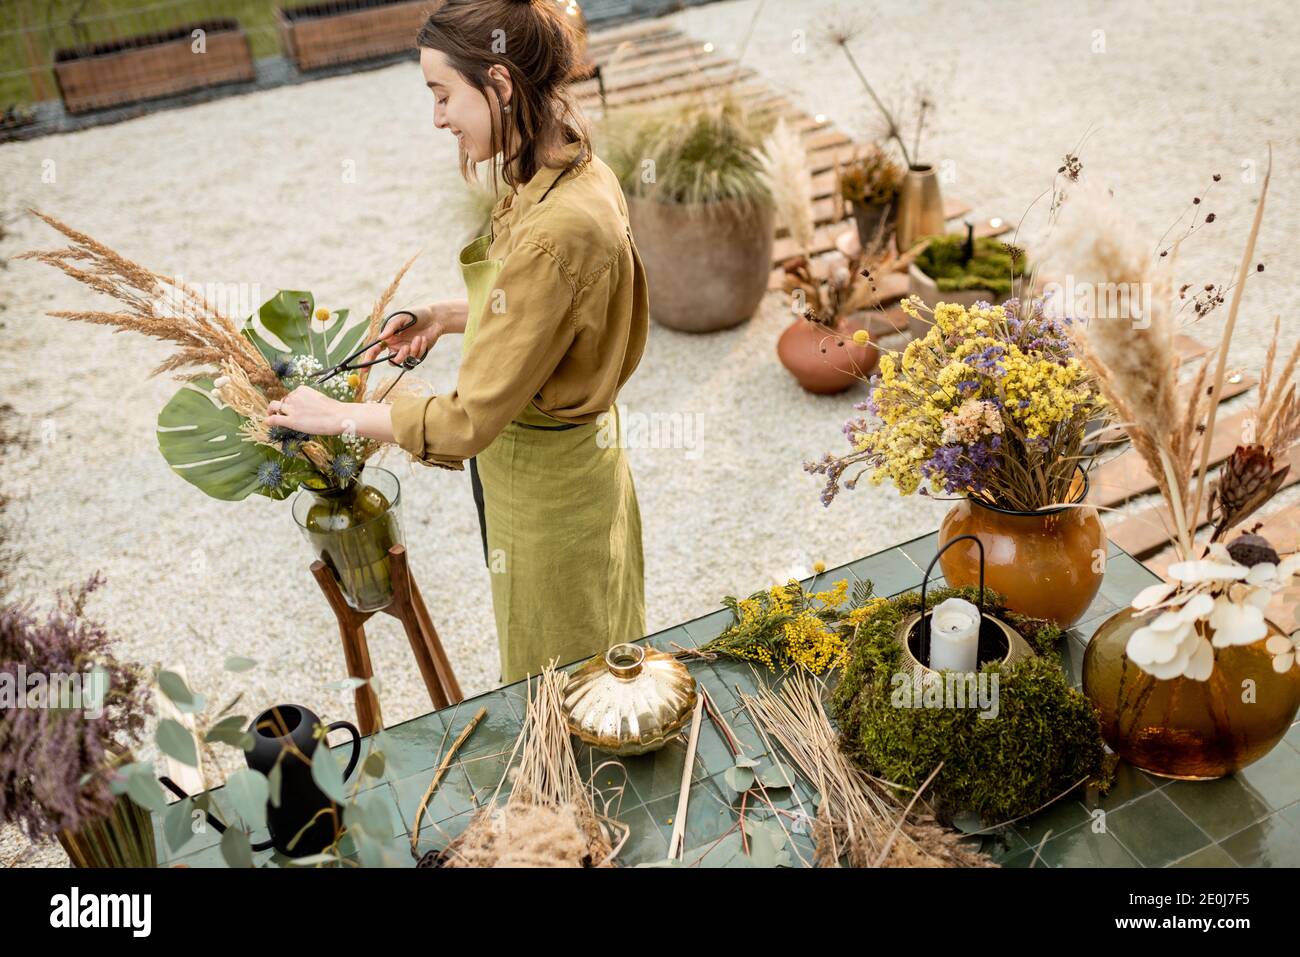 Young woman making compositions of dried and fresh flowers and herbs at the workshop outdoors. Florist, gardener or decorator composing floral decoration Stock Photo